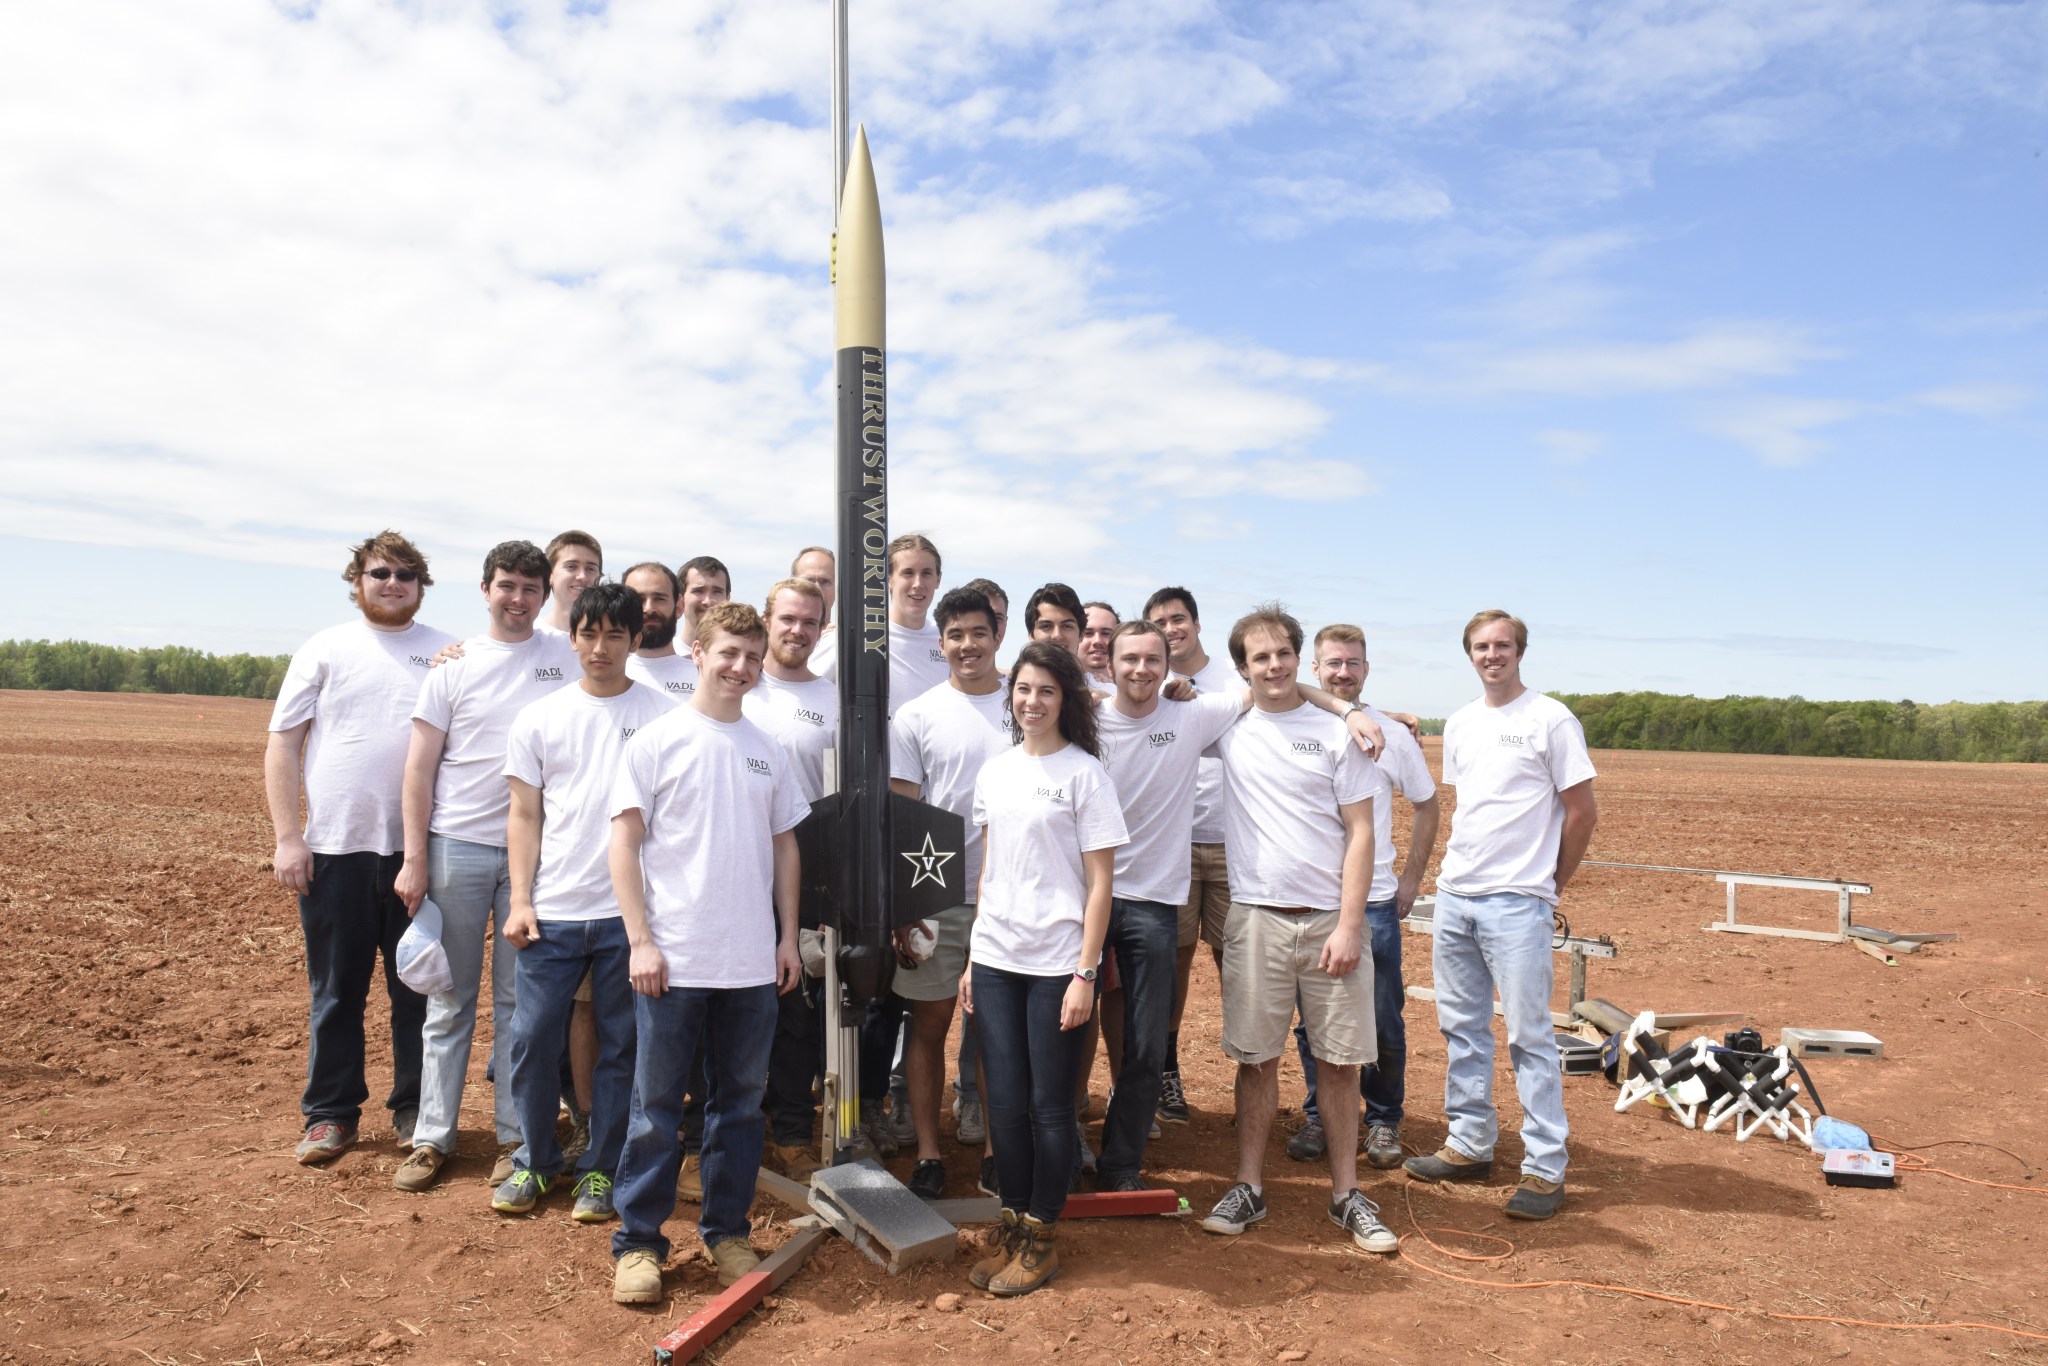 For the fourth year in a row, Vanderbilt University won first place at the 2016 Student Launch challenge, held near Marshall. 